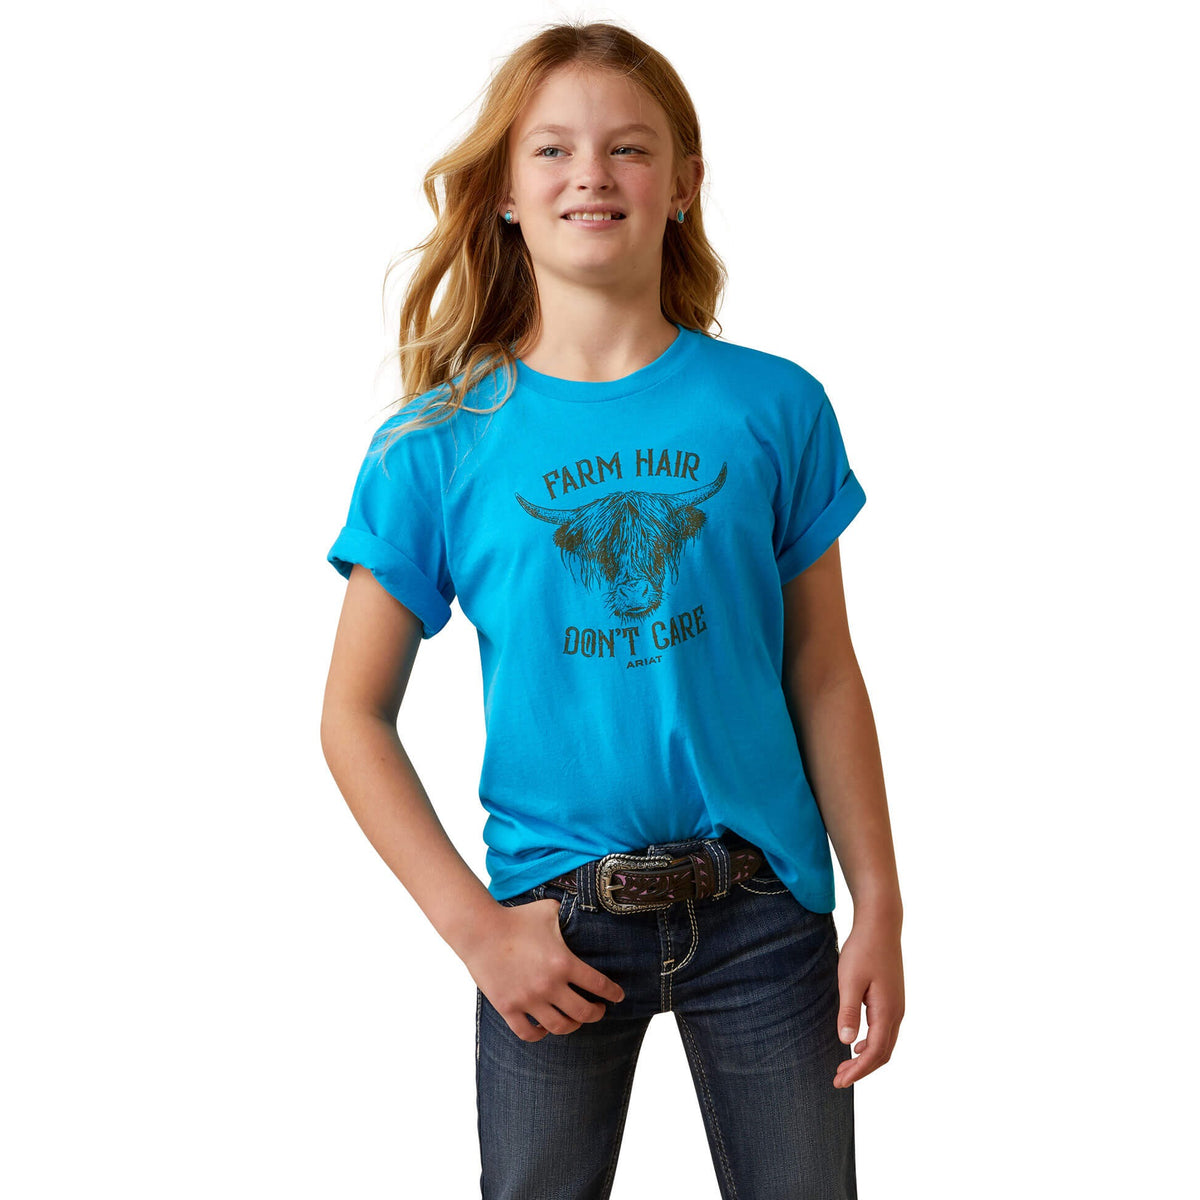 Ariat Girl's Farm Hair Don't Care Graphic Tee - Turquoise